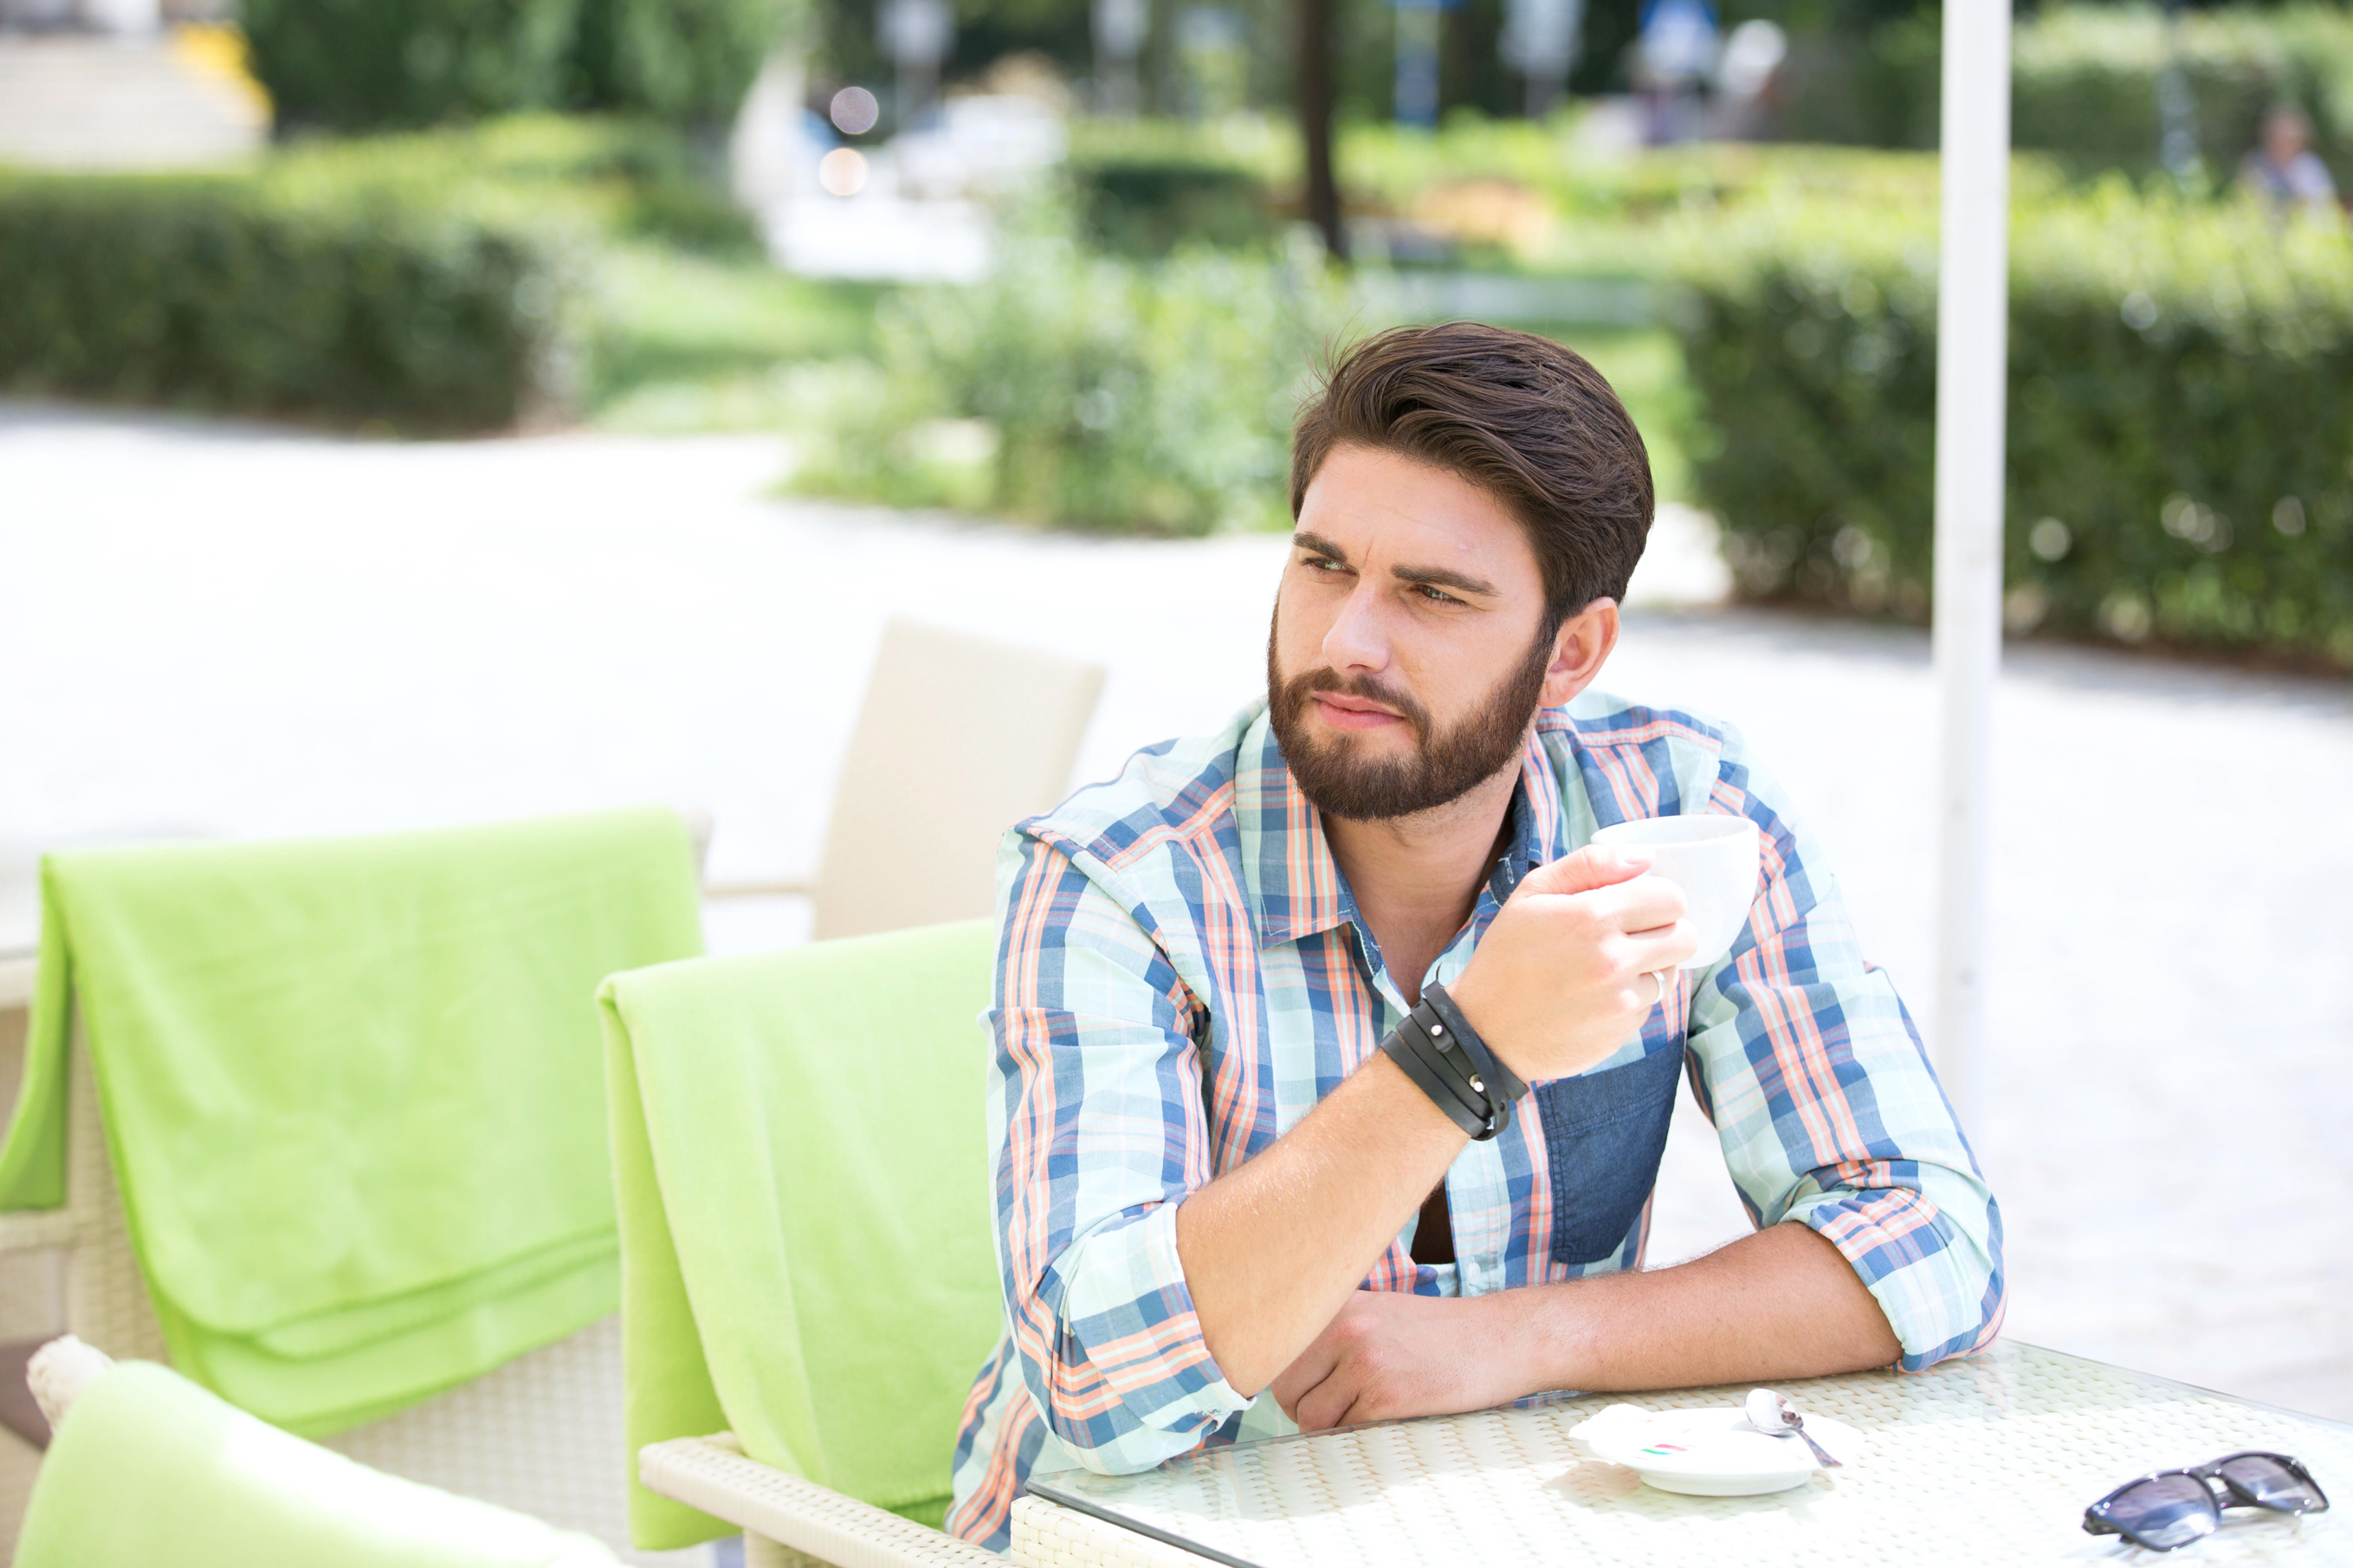 Thoughtful man having a coffee in outdoor cafe